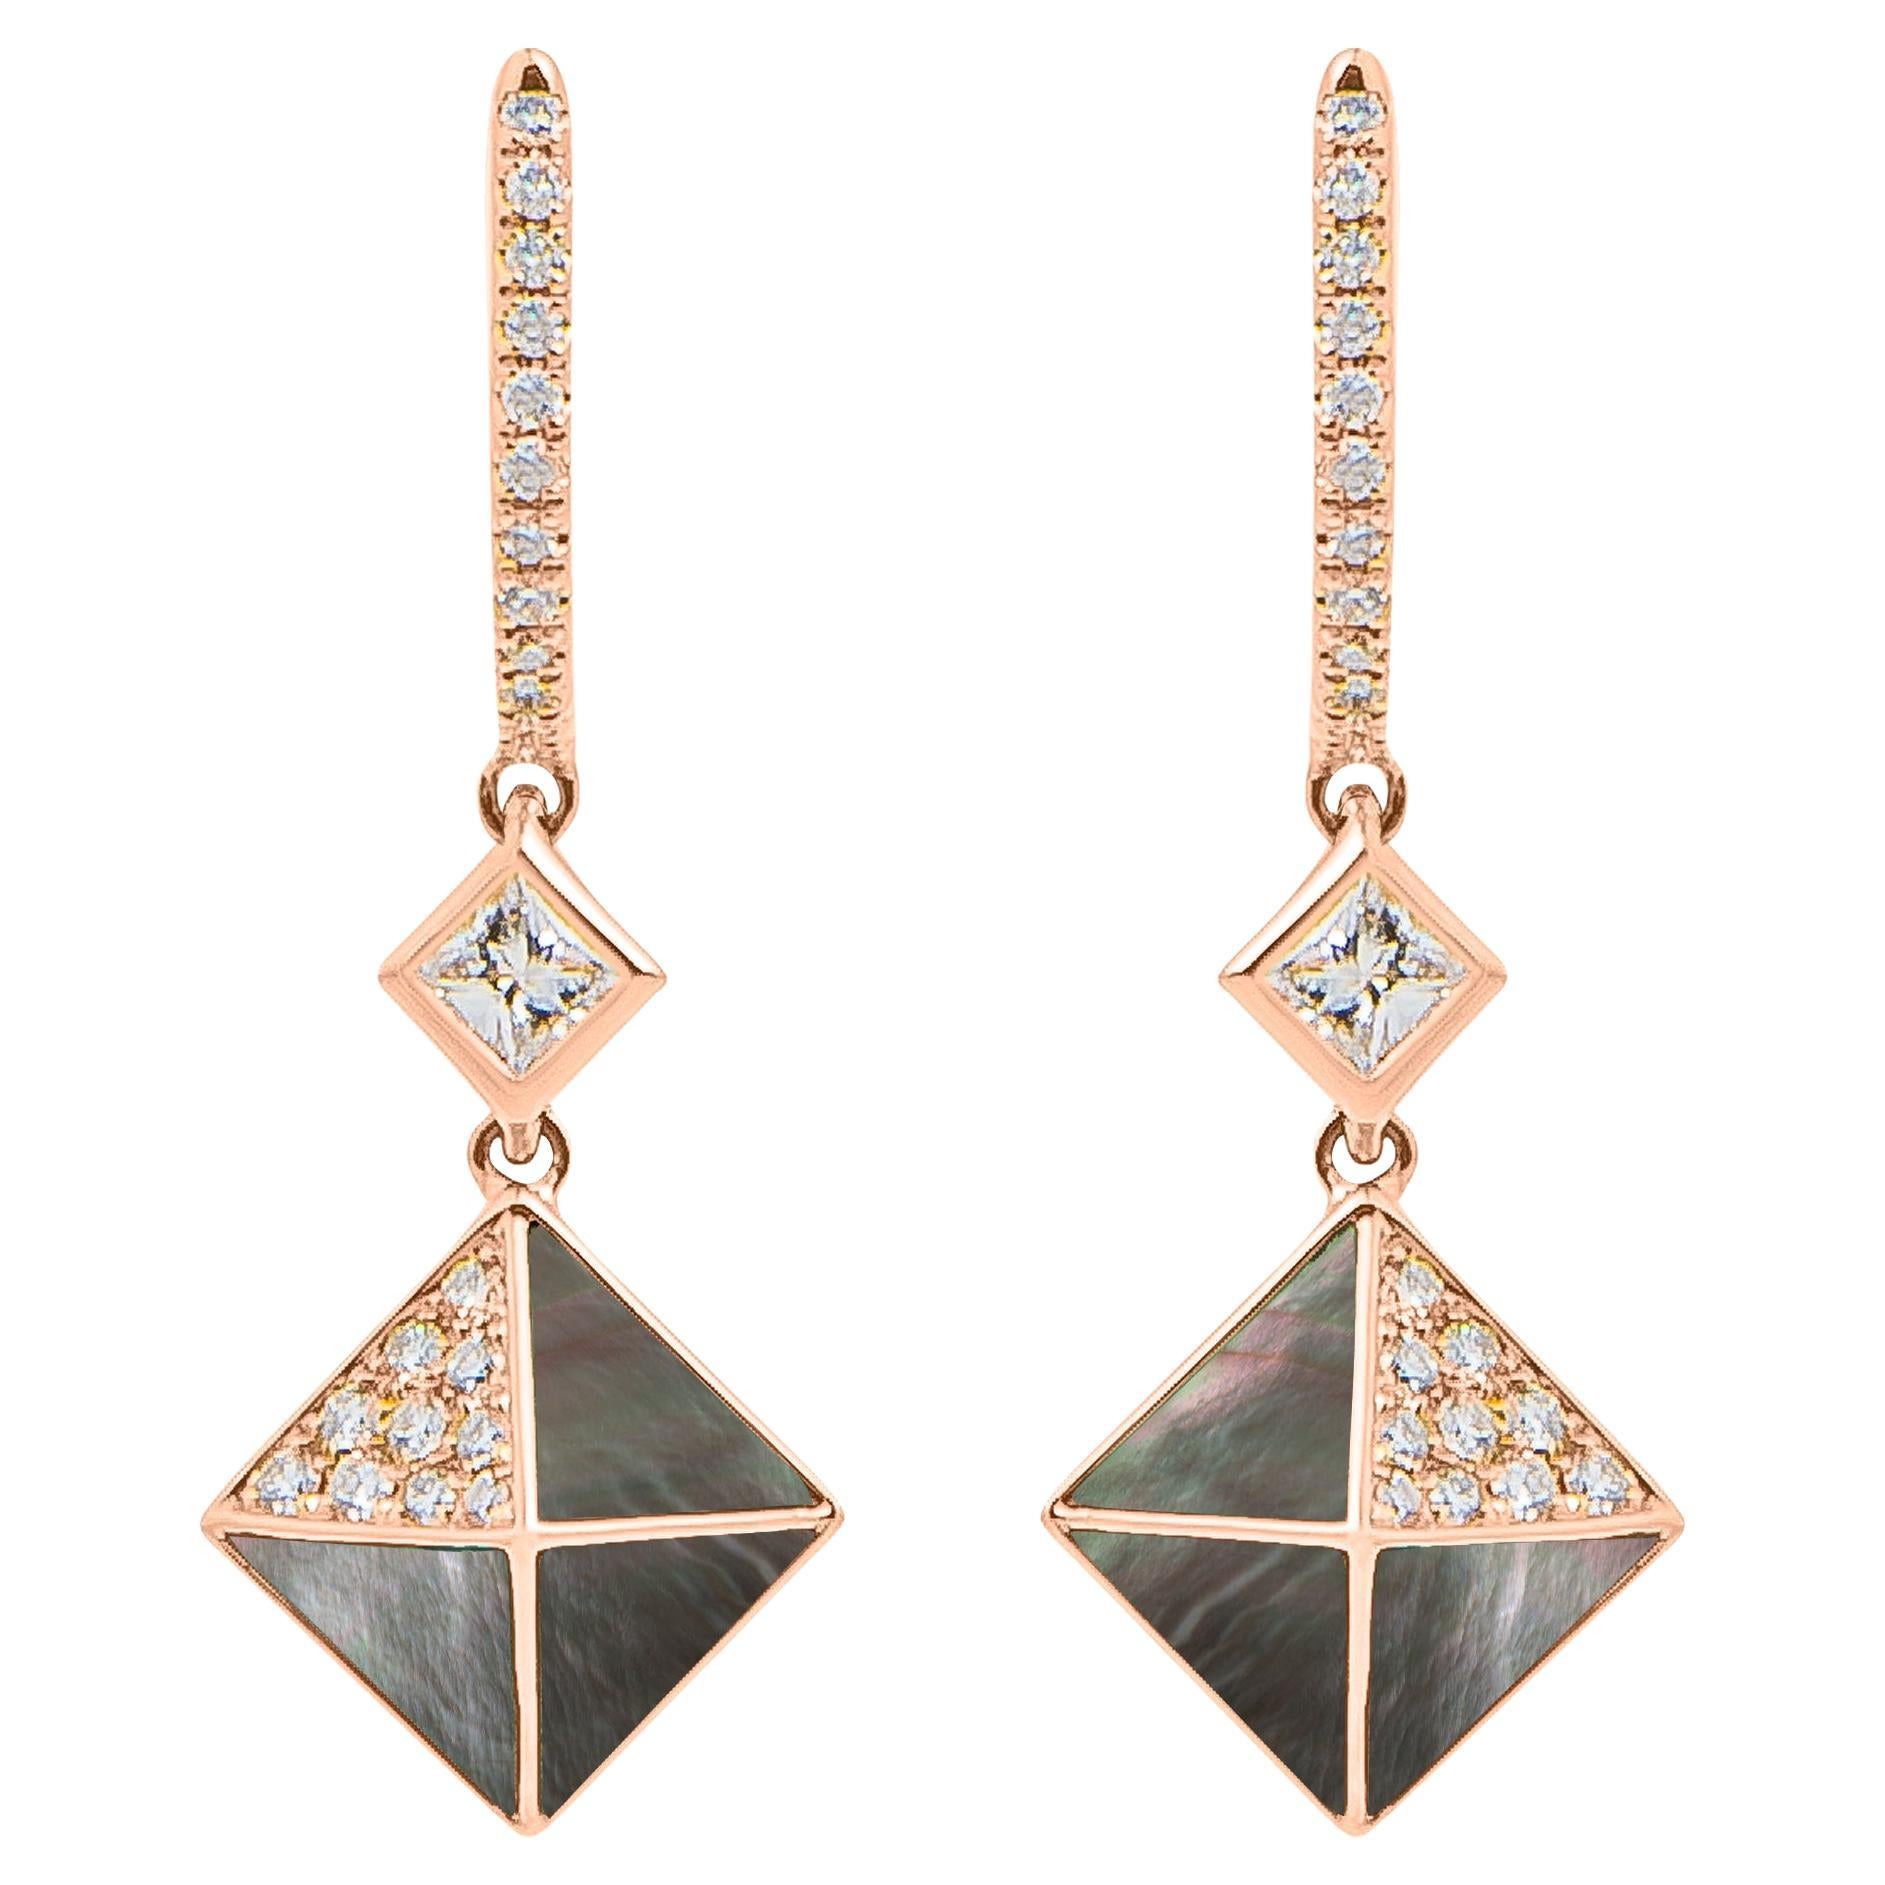 Tetra Apex Earrings with Grey Mother of Pearl and Diamonds in 18k Rose Gold